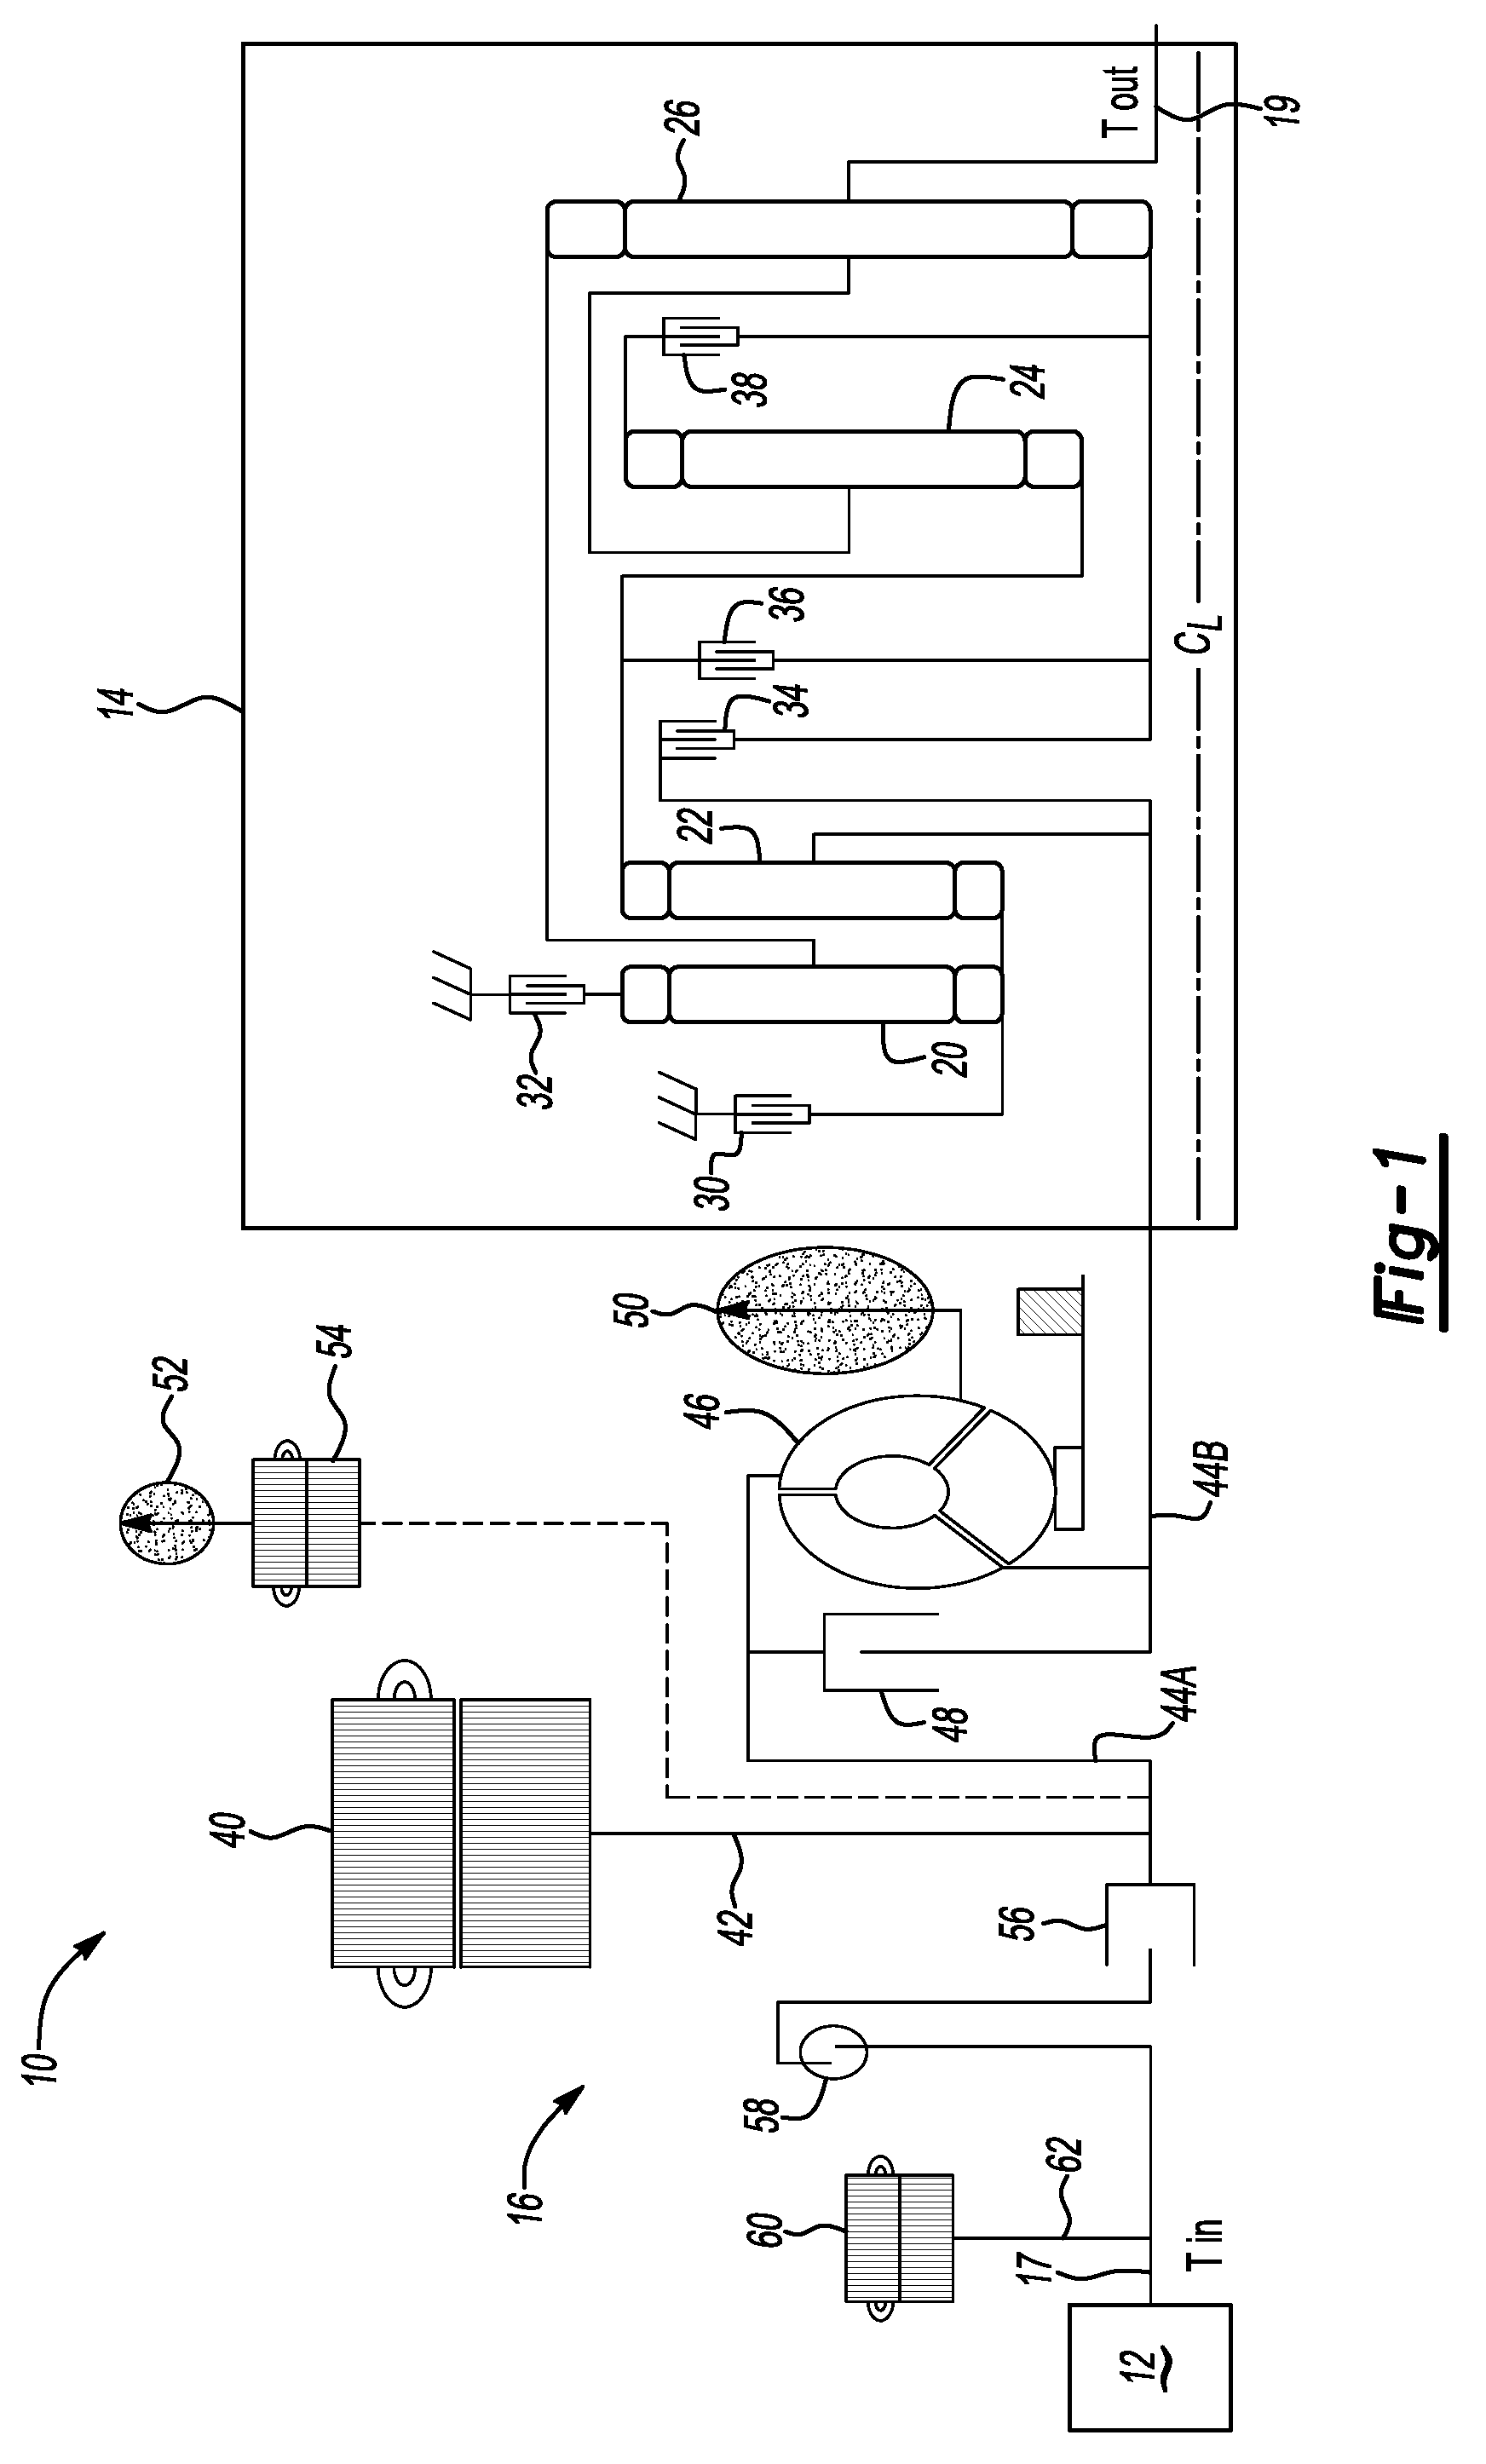 Apparatus and method for a quick start engine and hybrid system